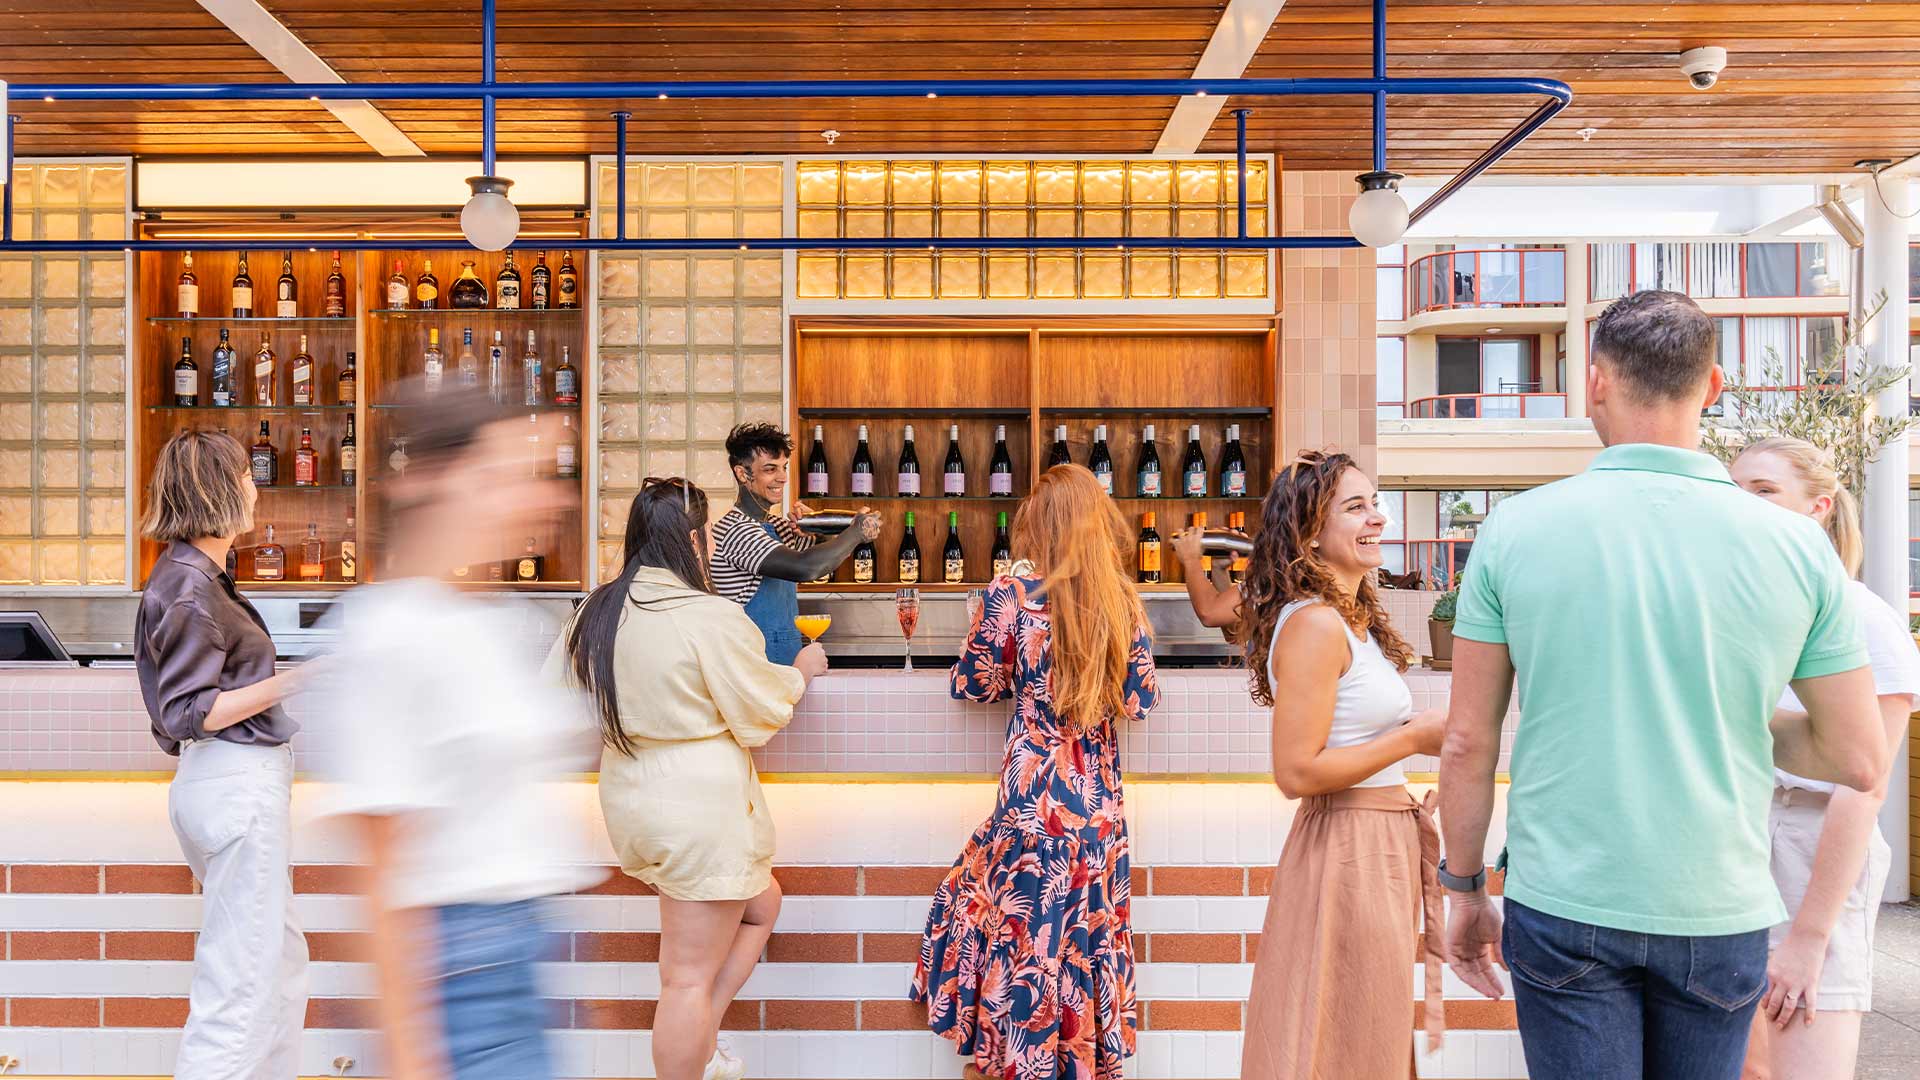 Luxe Sydney Hotel Kimpton Margot Is Launching Its Expansive Summer-Ready Rooftop Bar Harper This Week